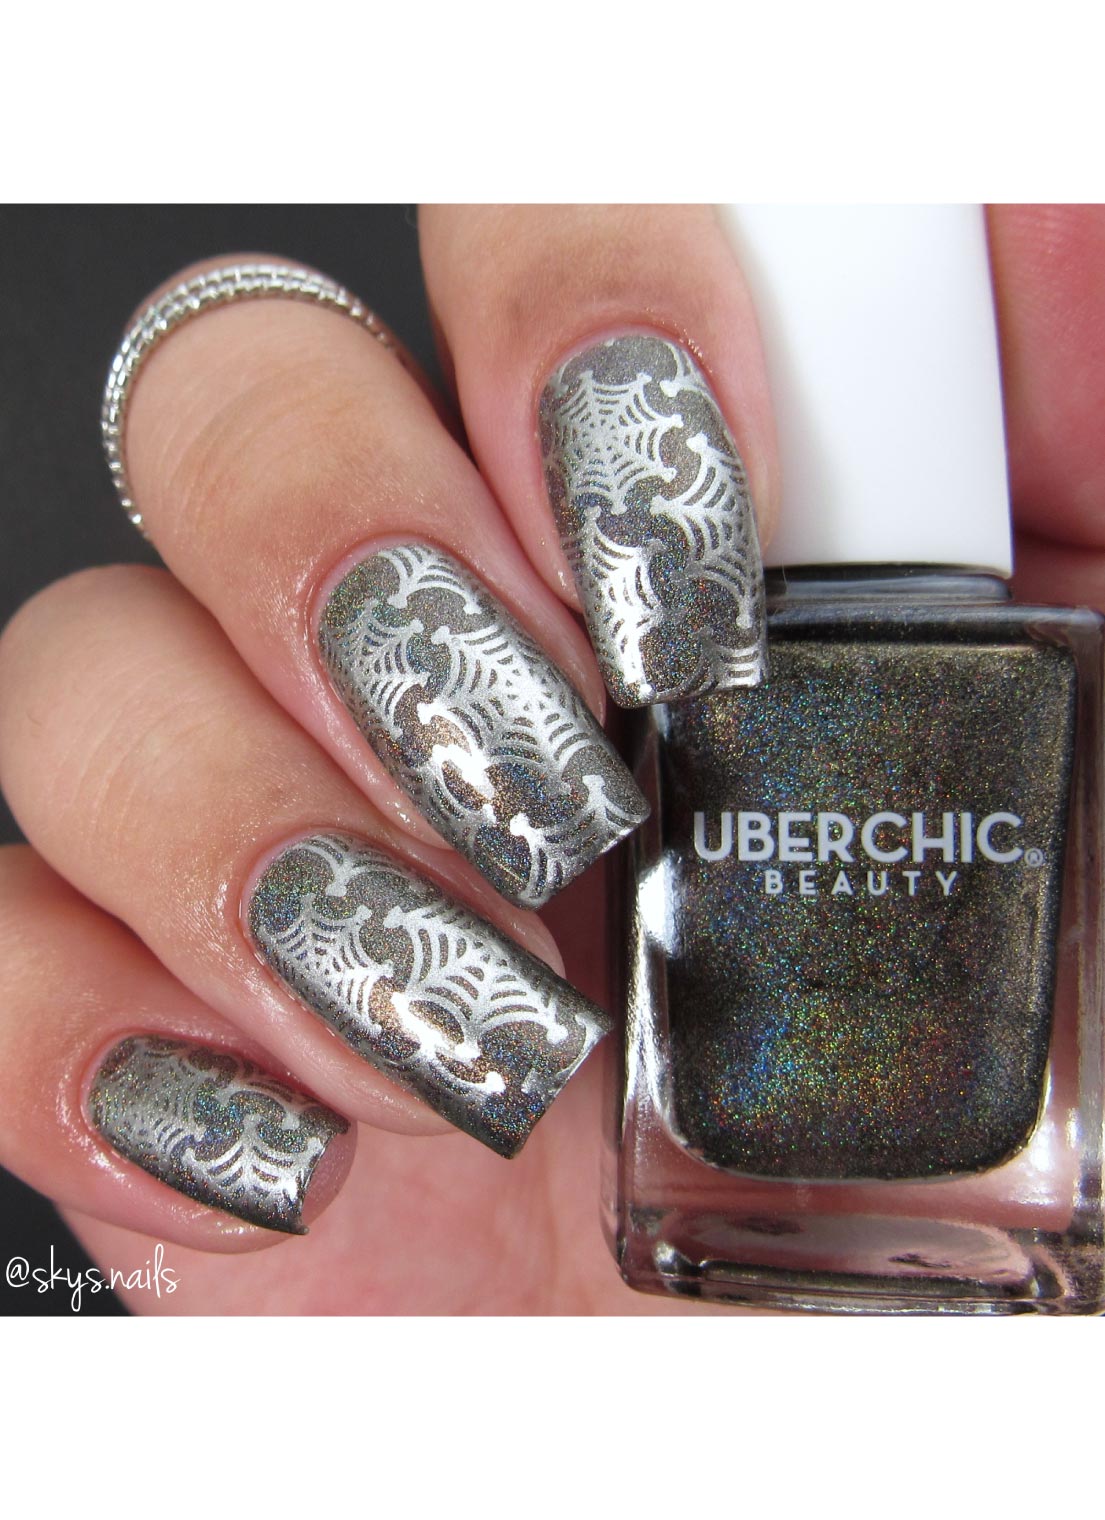 We All Scream for Ice Cream! - Uber Chic Stamping Plate